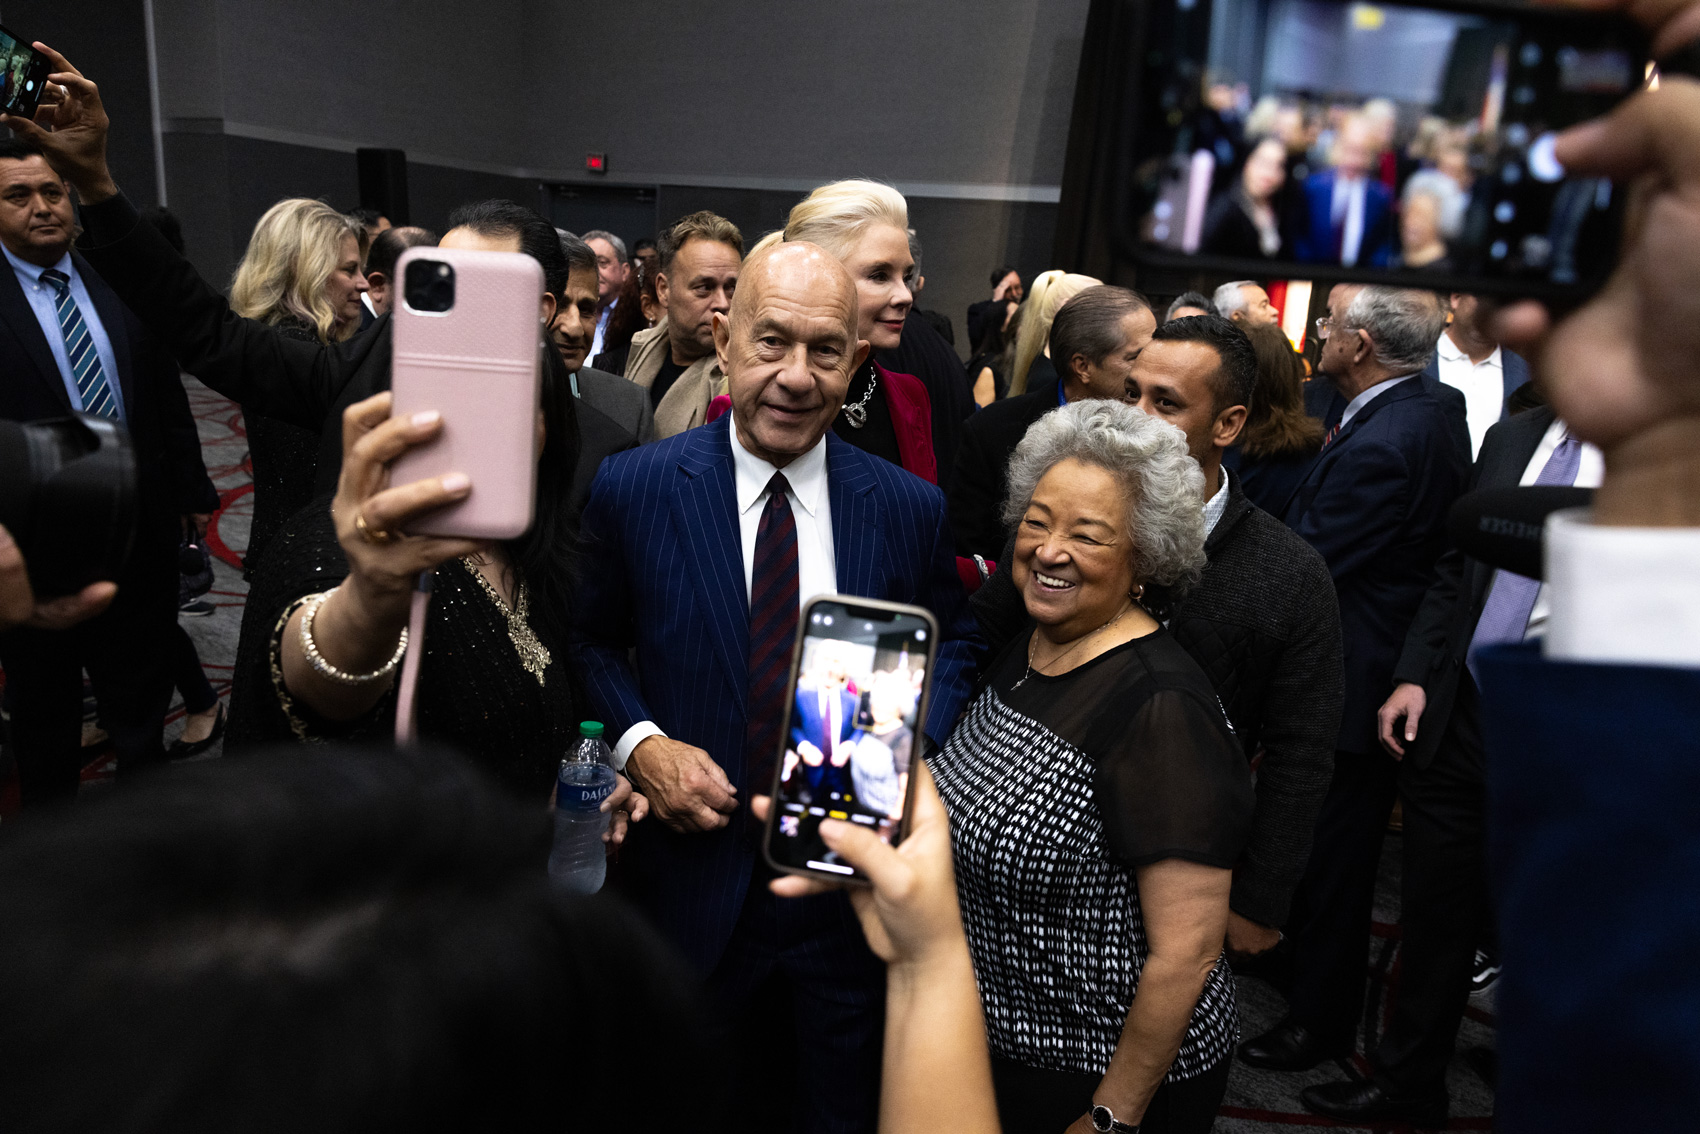 State Sen. John Whitmire takes a photo with Lenora Sorola-Pohlman, at right, as he greets attendees during a watch party at the George R. Brown Convention Center,